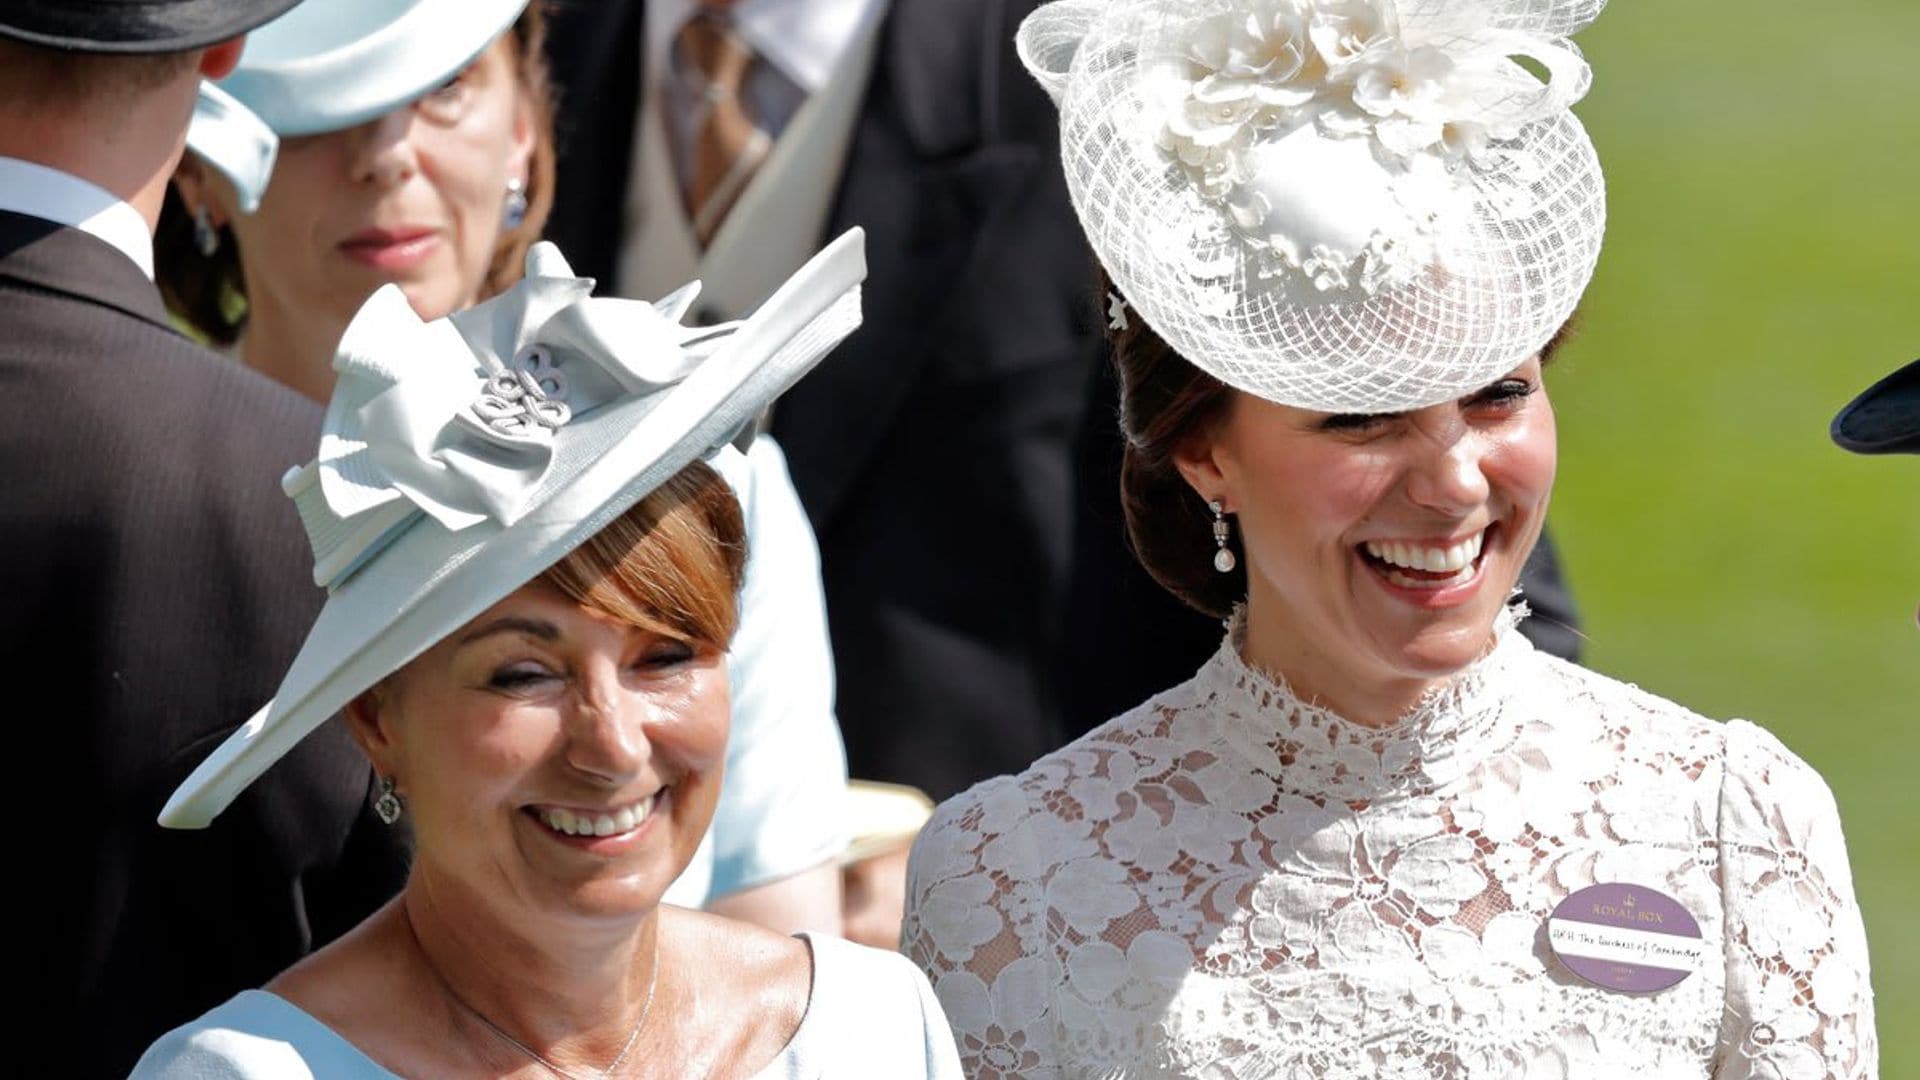 Kate Middleton's mom is already counting down to Christmas: 'December will be magic again'